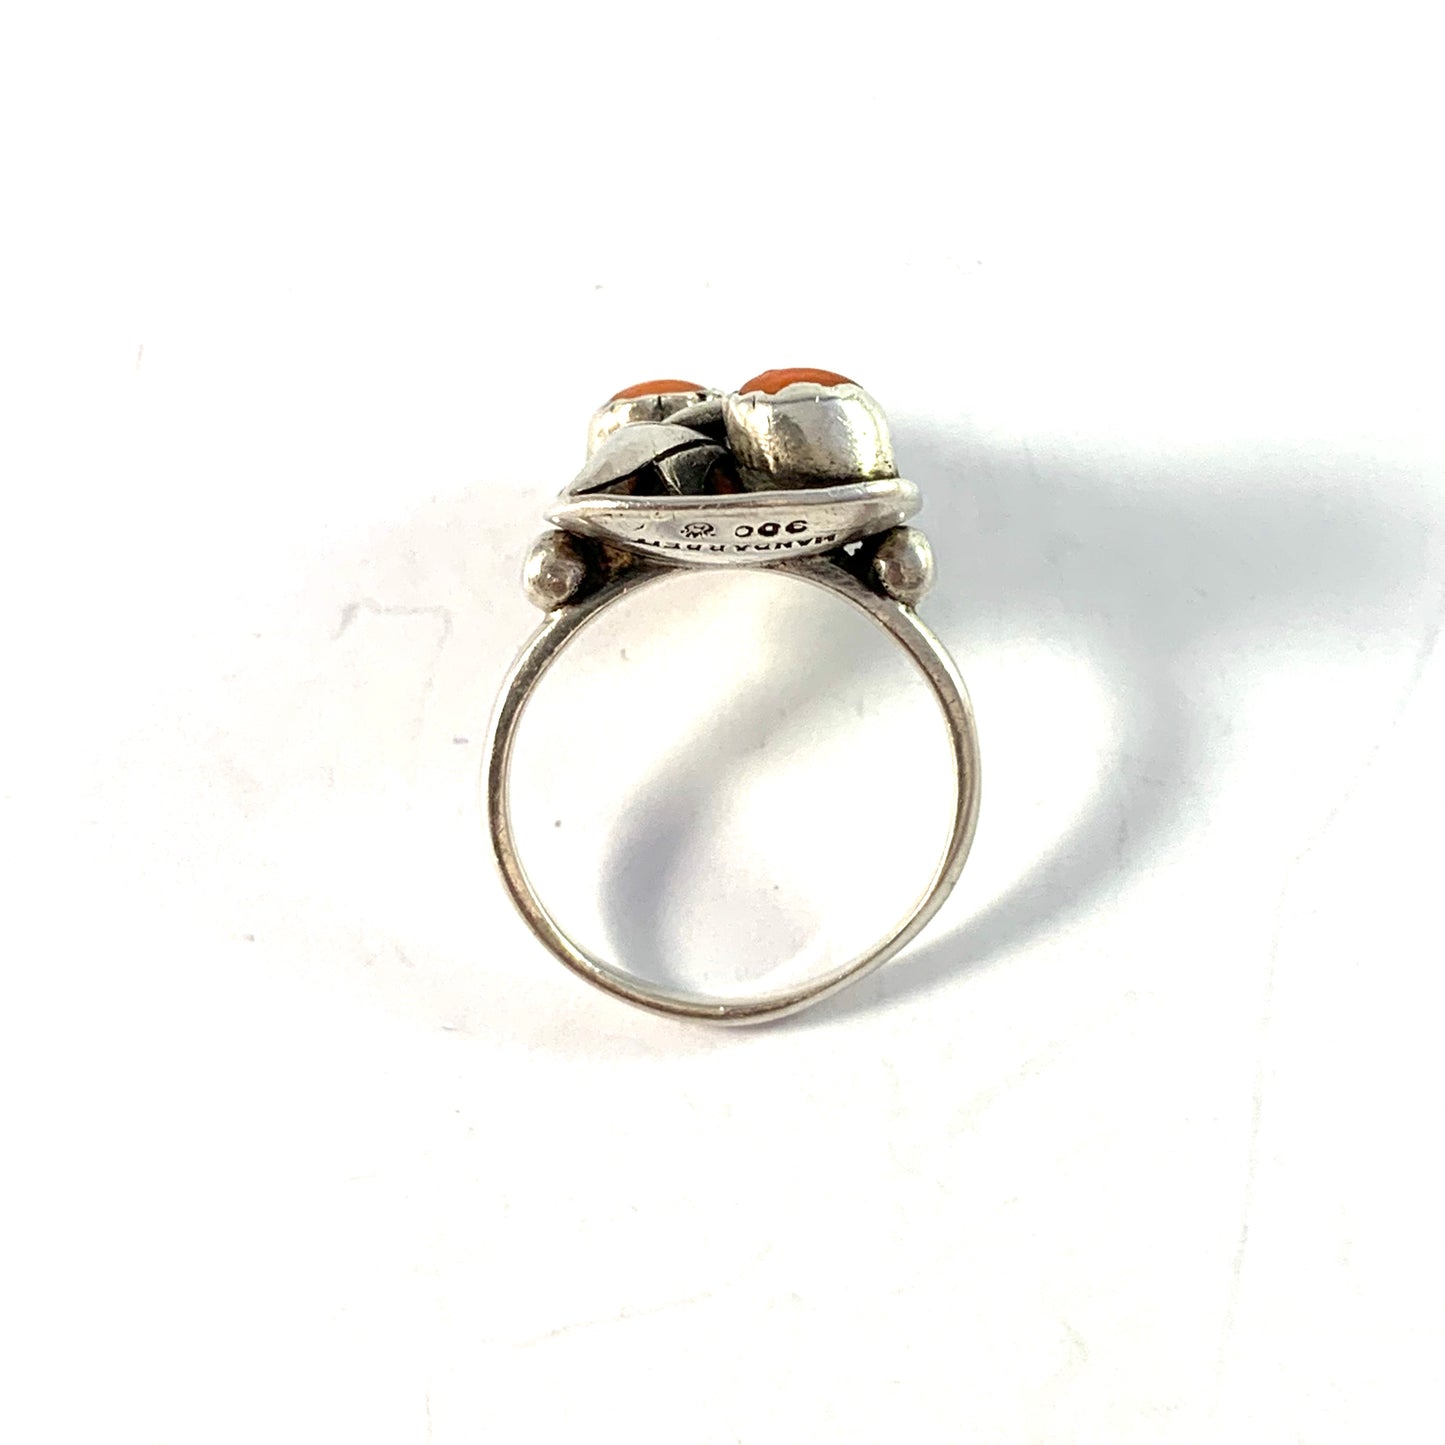 Germany early 1900s Solid 900 Silver Coral Ring.